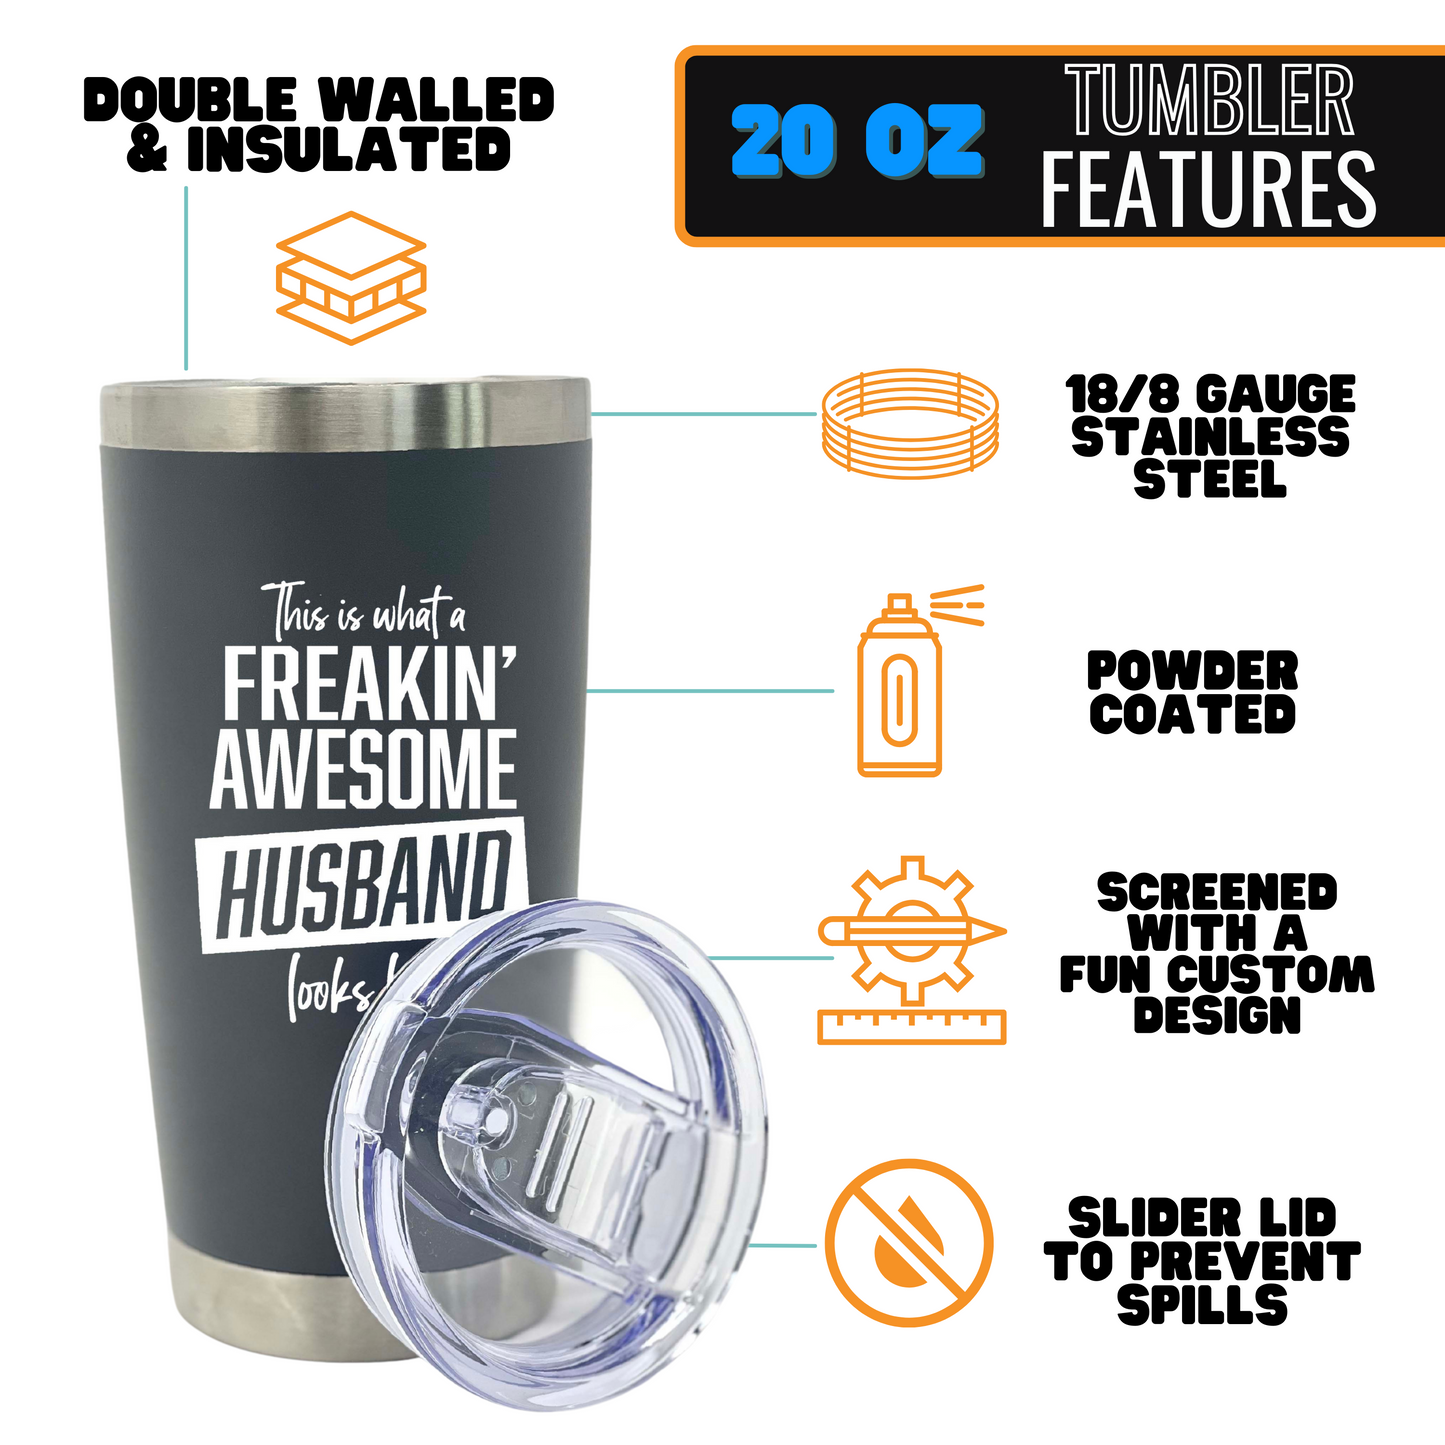 Funny Gift for Husband and Wife - Awesome Wife Cup Husband Tumbler Coffee Mug - Great Travel Cup Gifts for Husbands and Wives, Birthday Presents for Her, Him (Husband and Wife 20 oz Tumbler Gift Set)